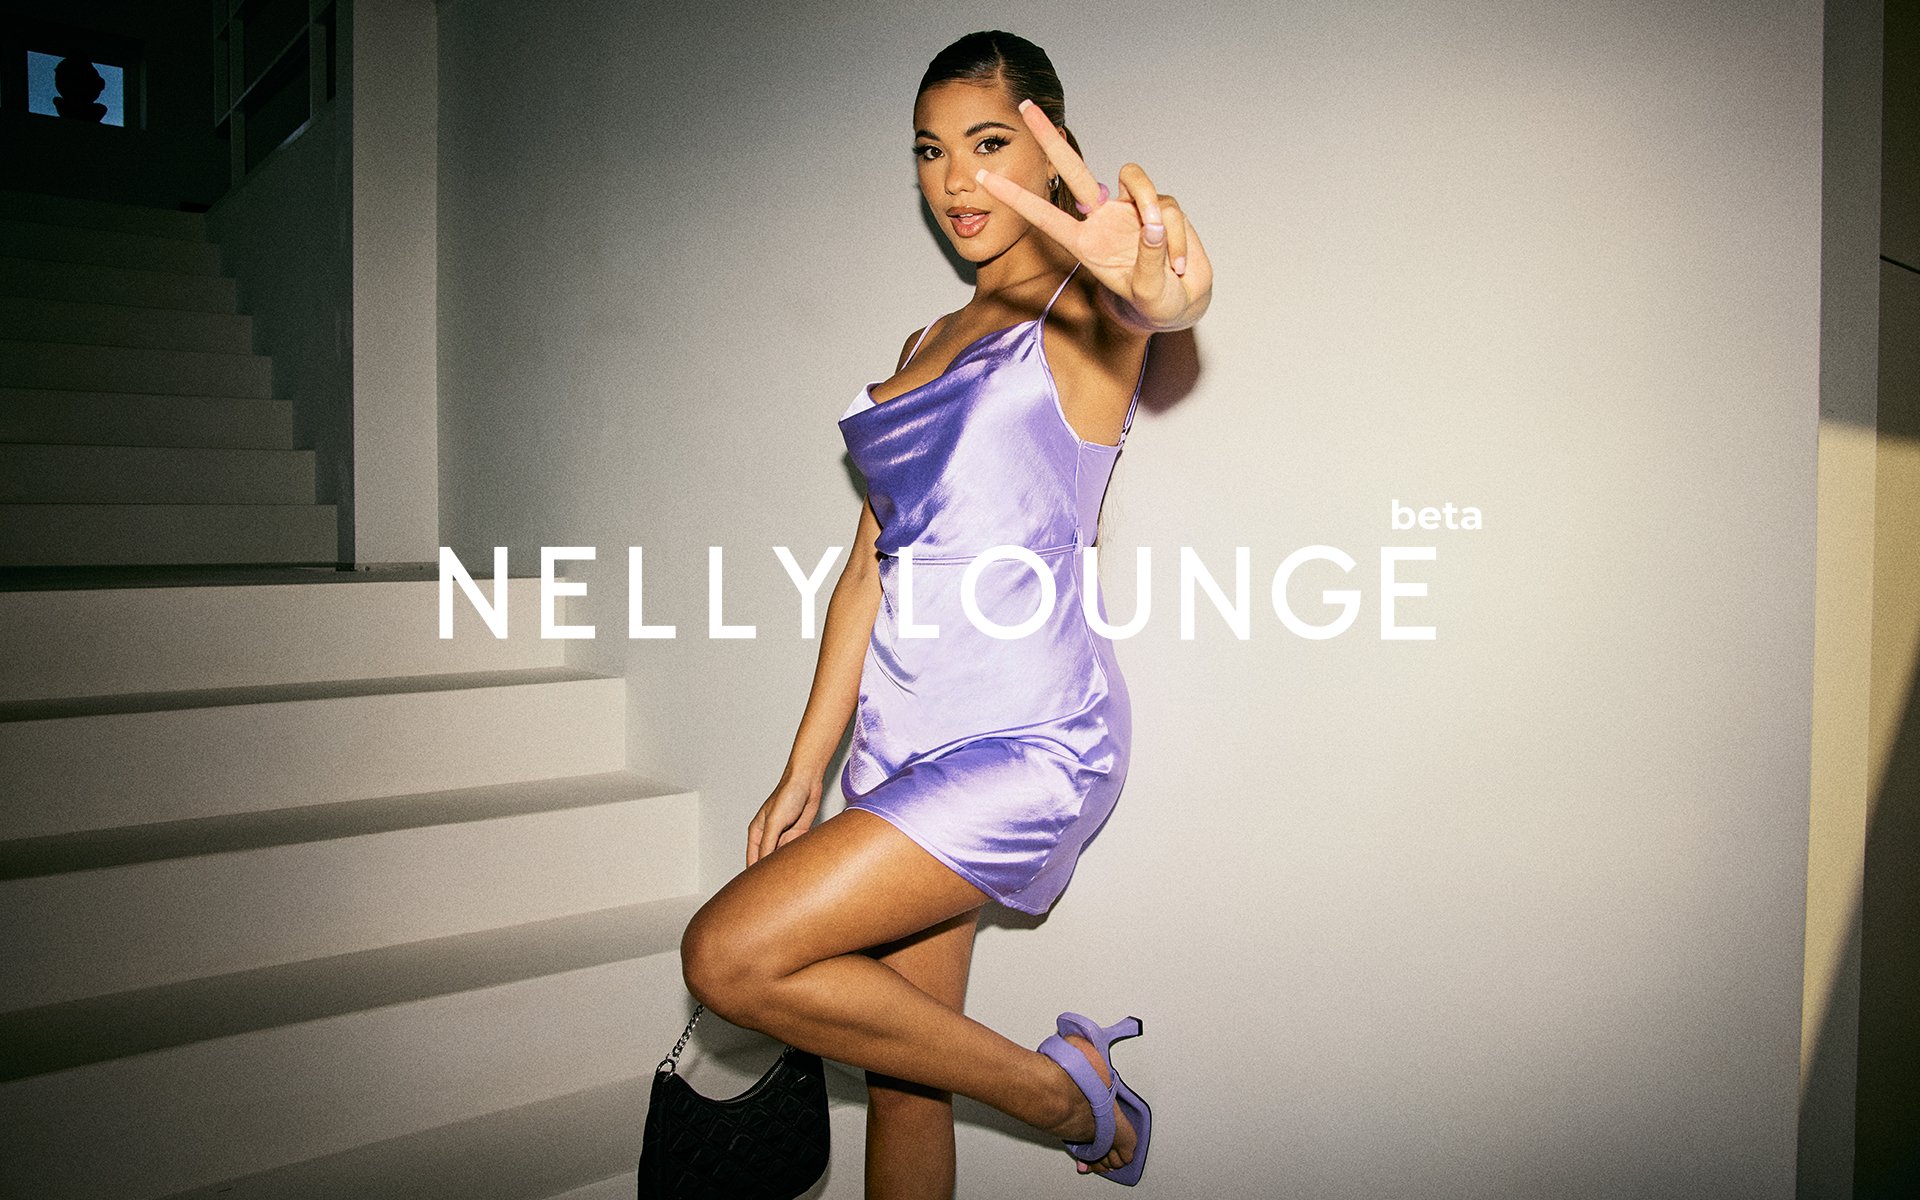 Nordic online fashion brand Nelly launches a customer community with TokyWoky